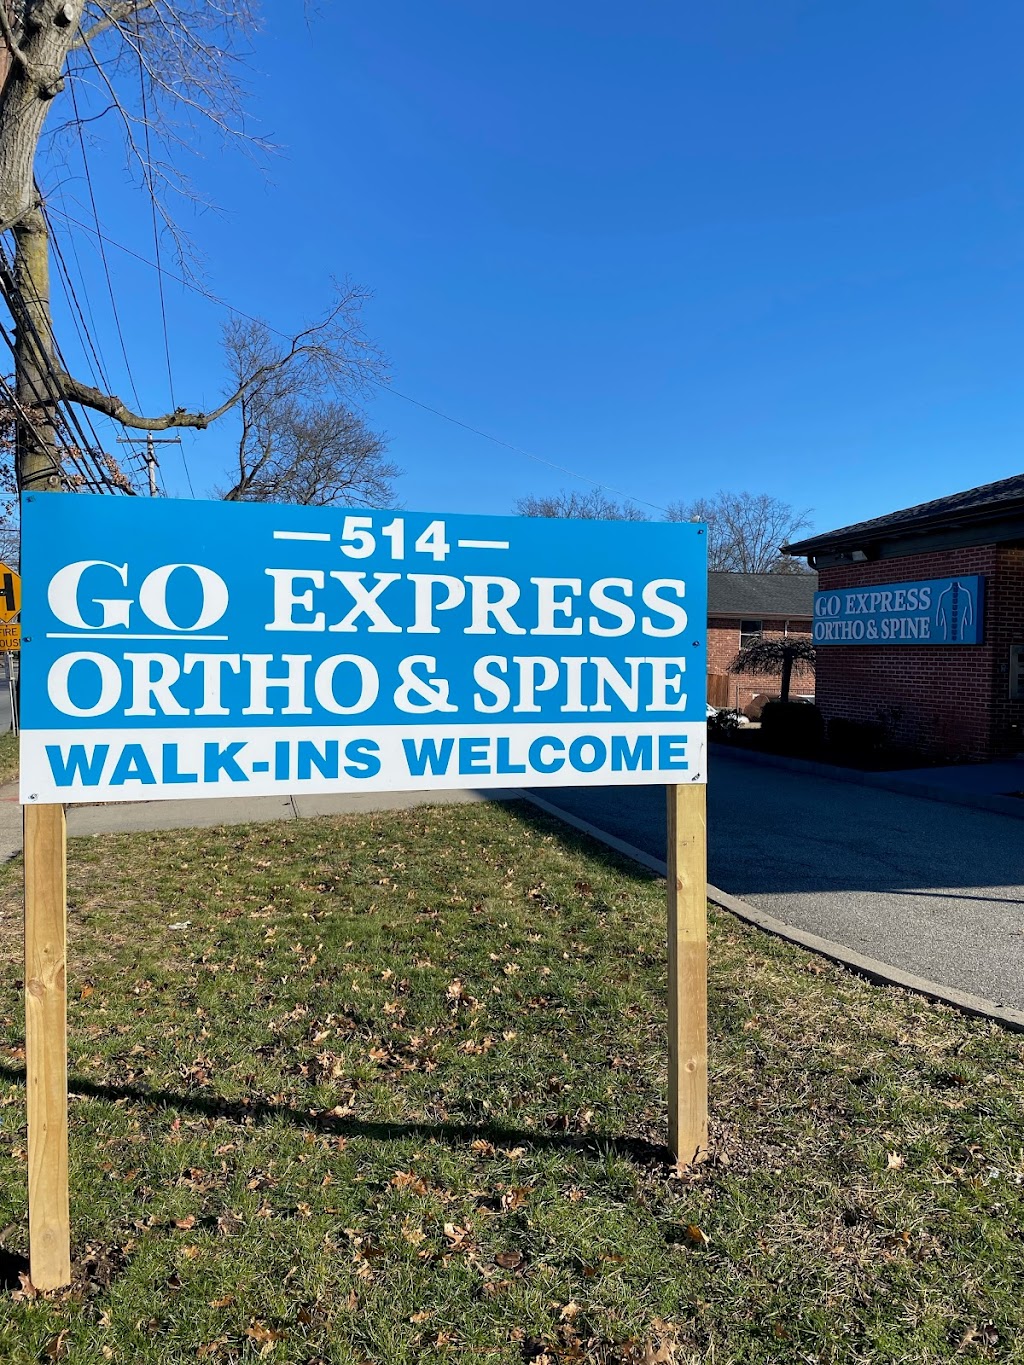 GO ORTHO & SPINE EXPRESS | 514 Old Country Rd, Westbury, NY 11590 | Phone: (516) 743-9450